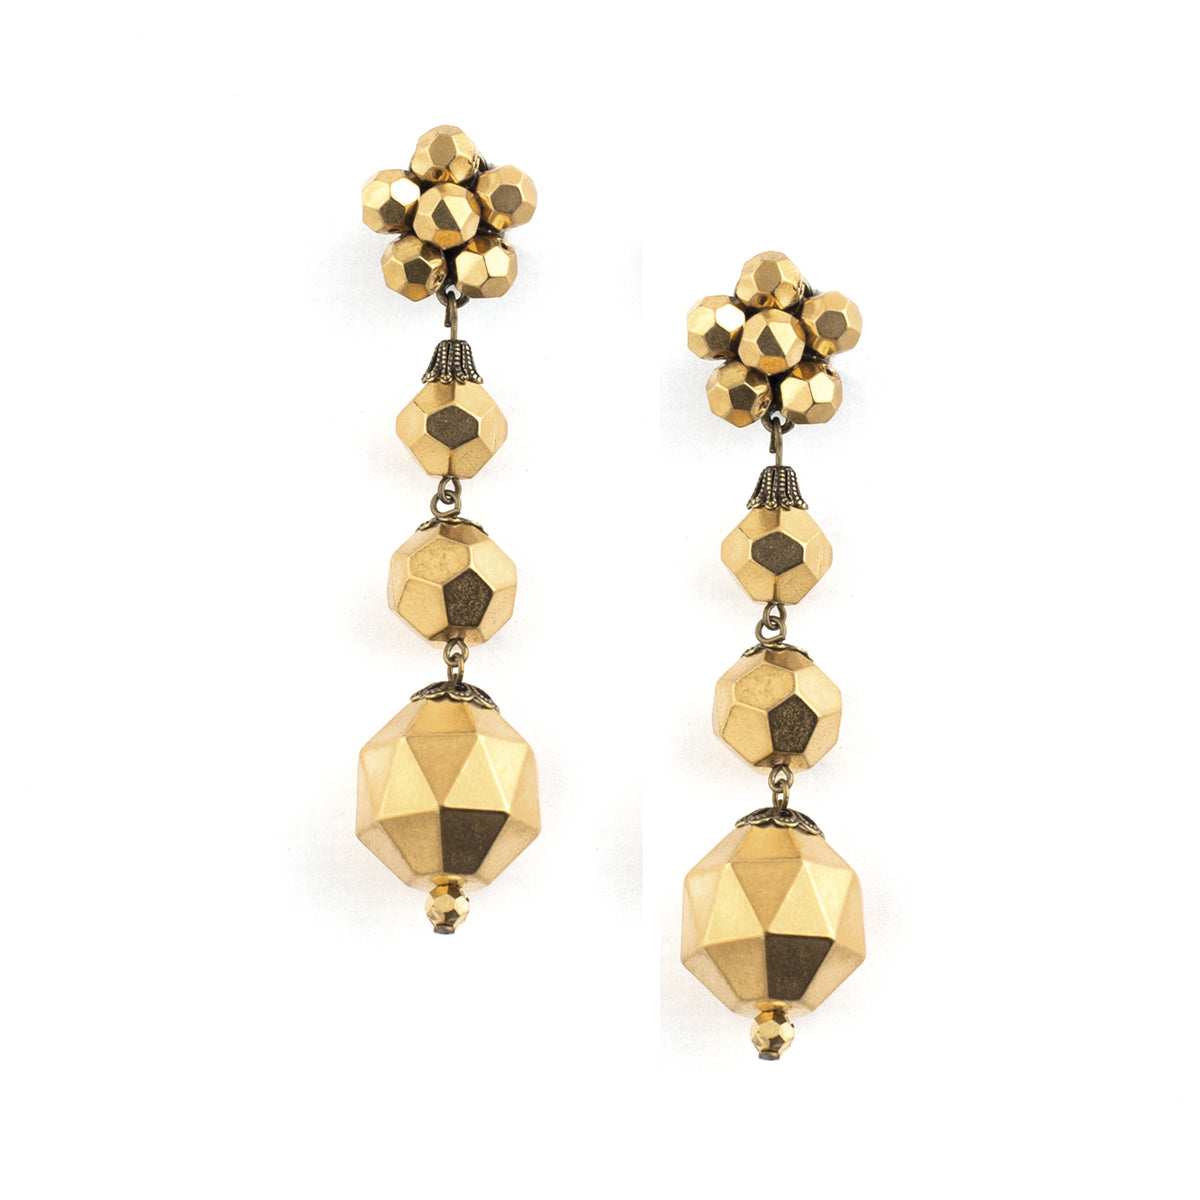 Donna Earrings - Limited Edition